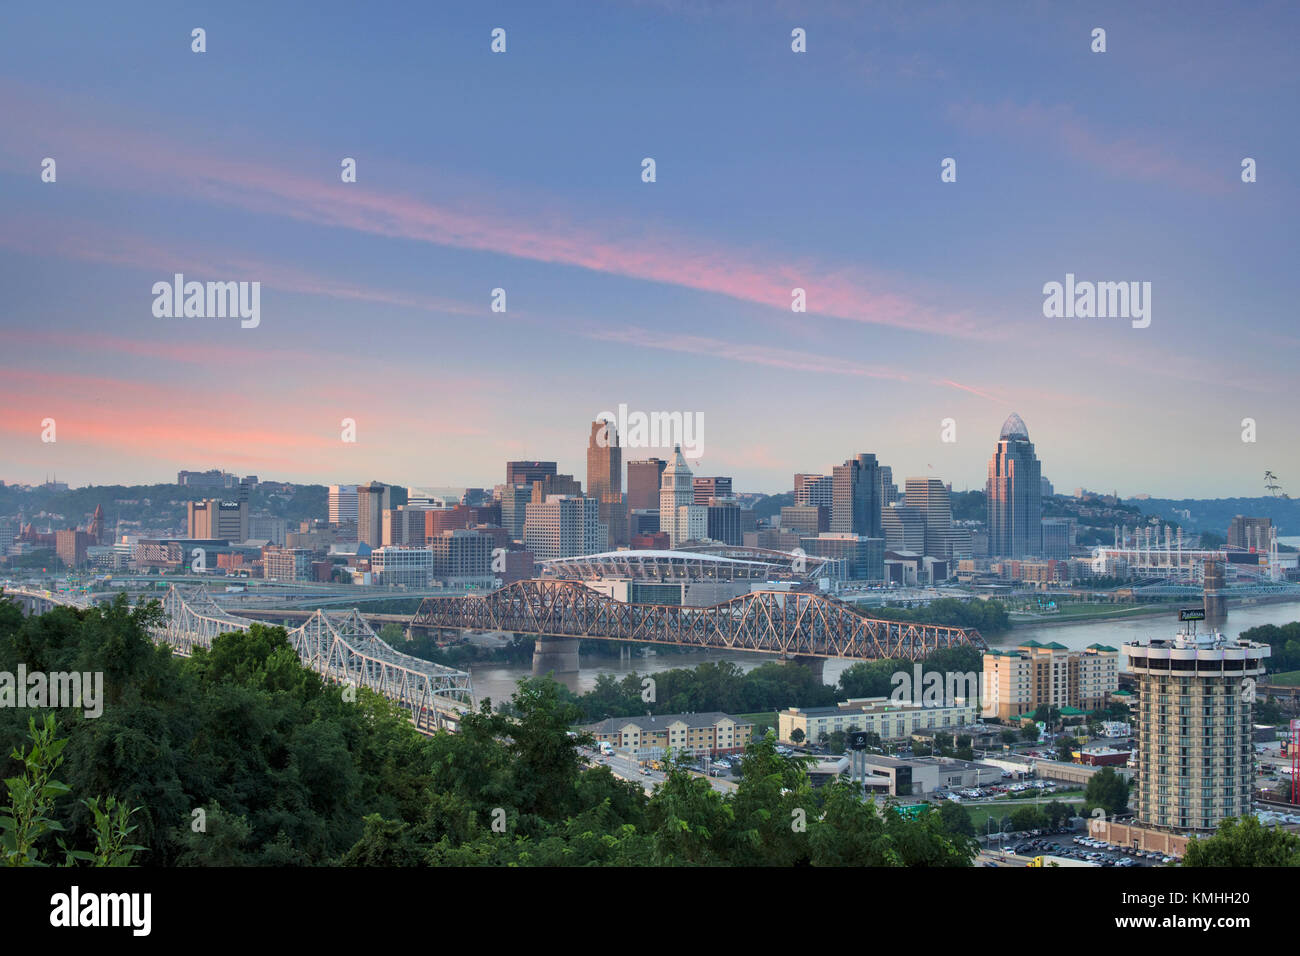 Colorful Sunset over a Skyline of Cincinnati, Ohio from Devou Park in Kenton Hills, Kentucky from Across the Ohio River Stock Photo